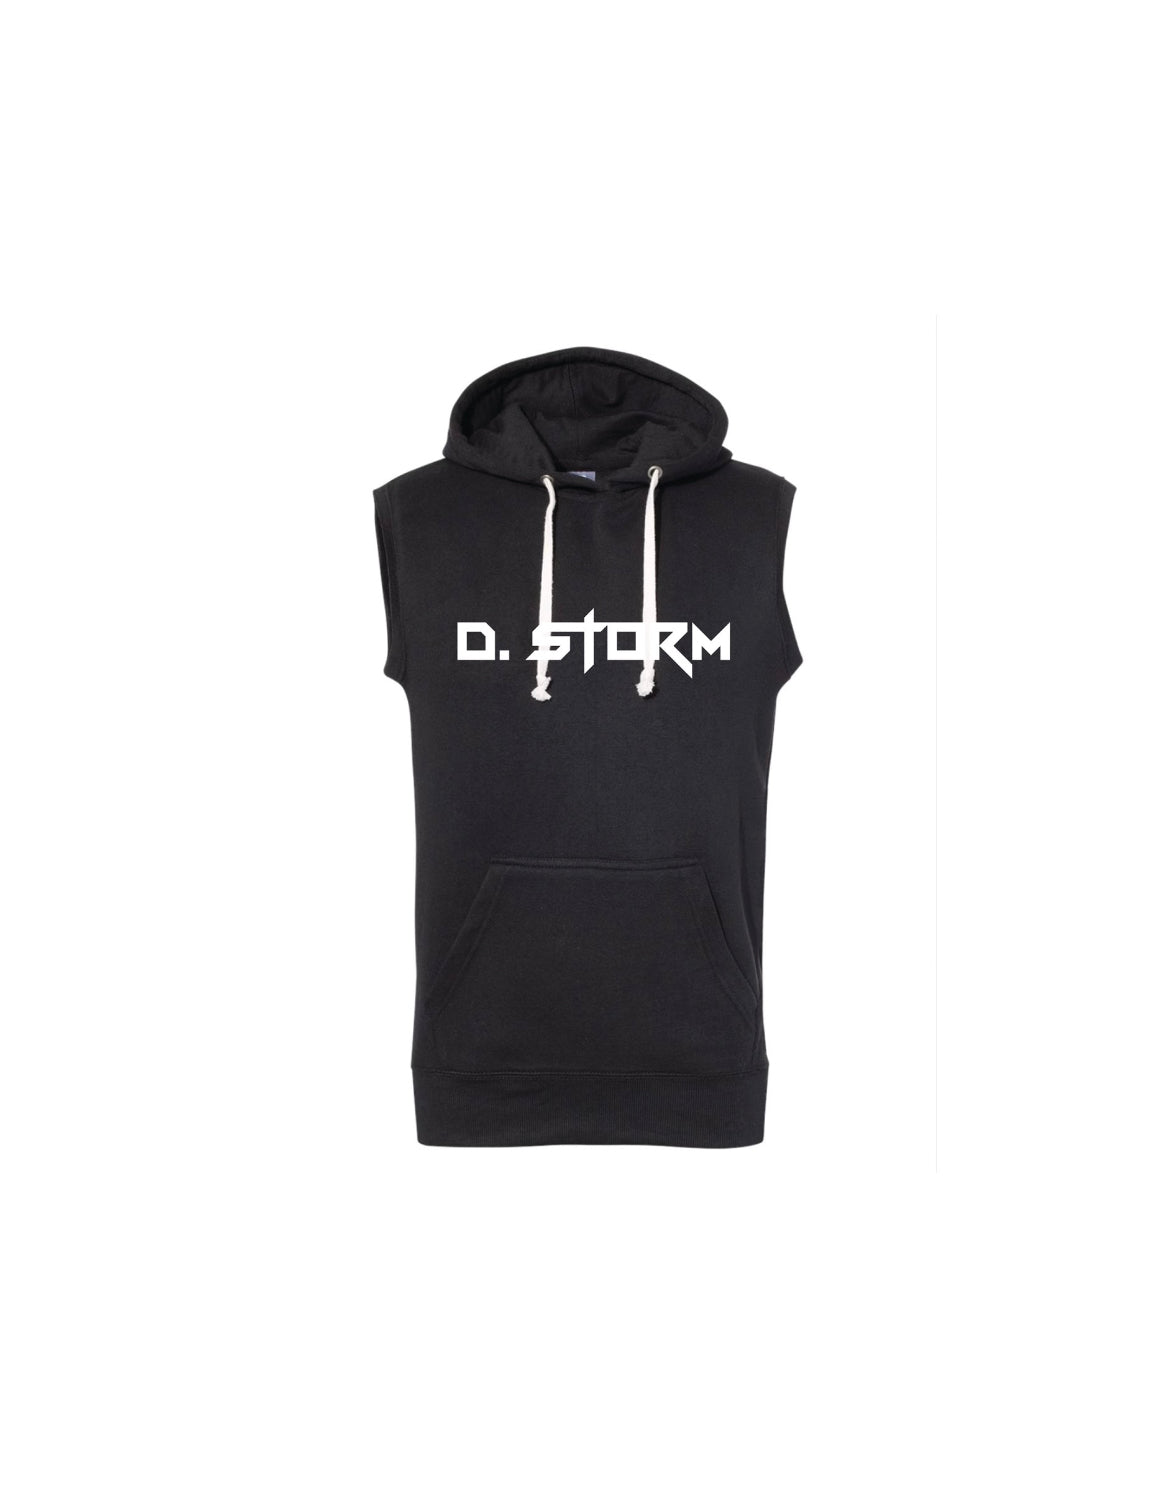 ‘DSTORM’ Workout Sleeveless Hoodie